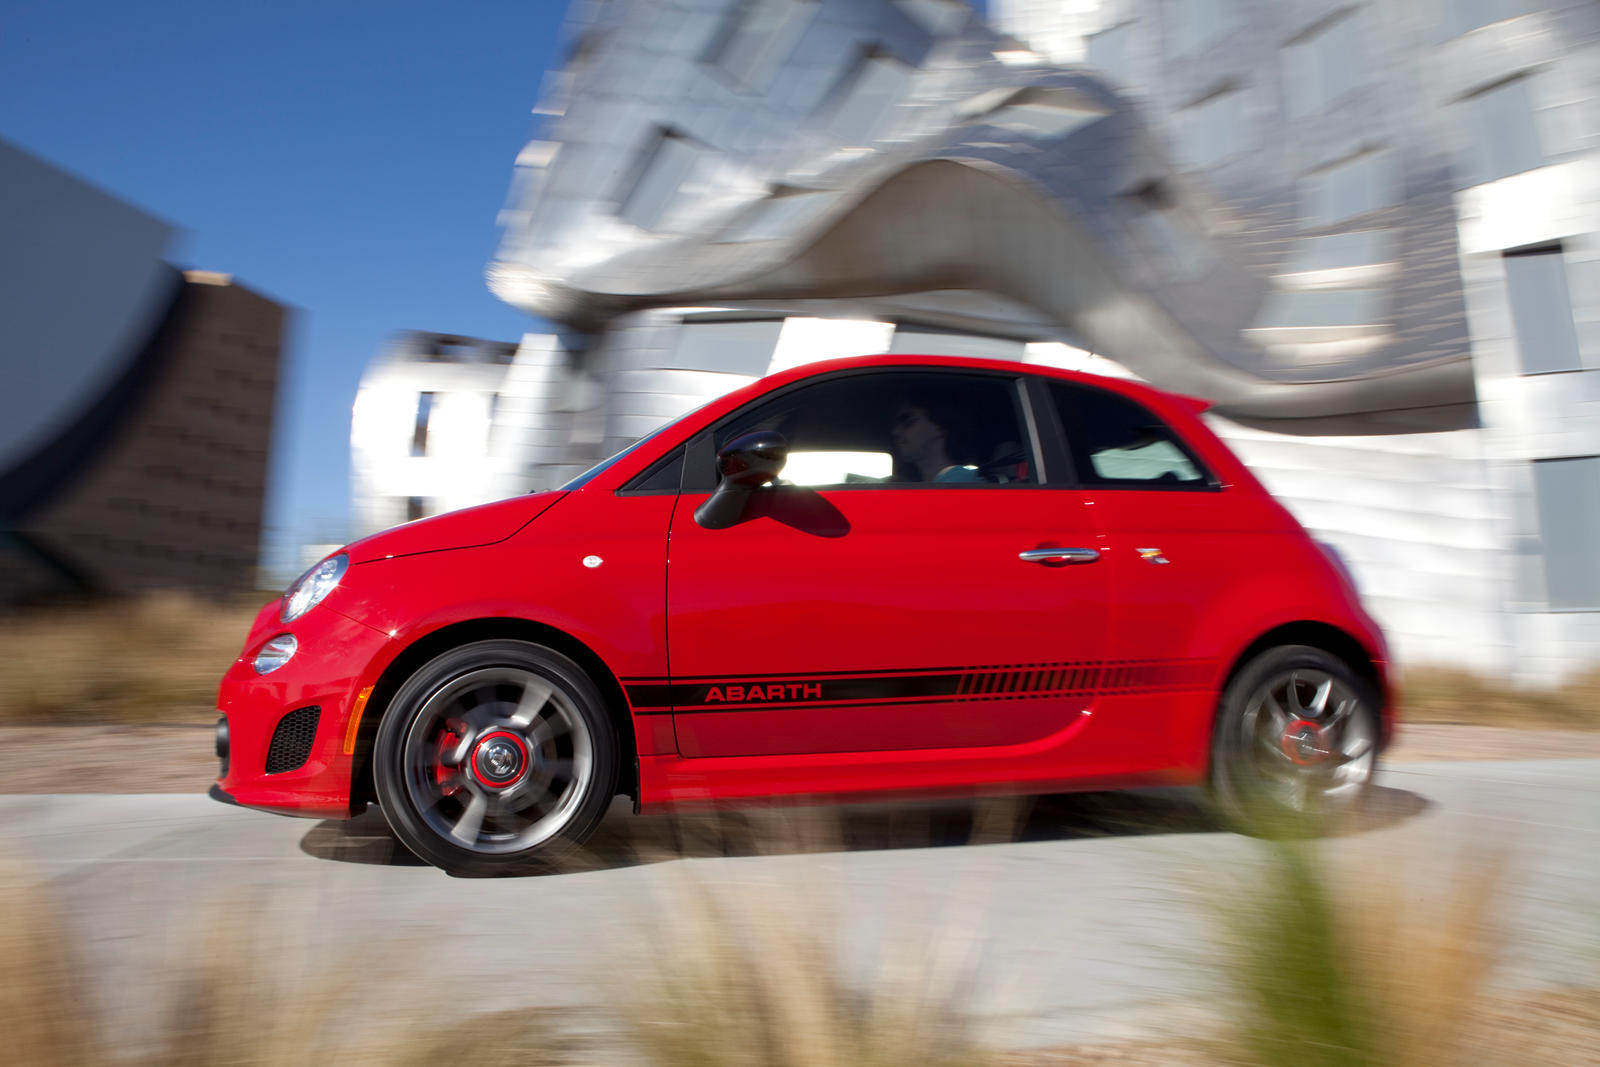 A red FIAT 500 Abarth zips around a curve.